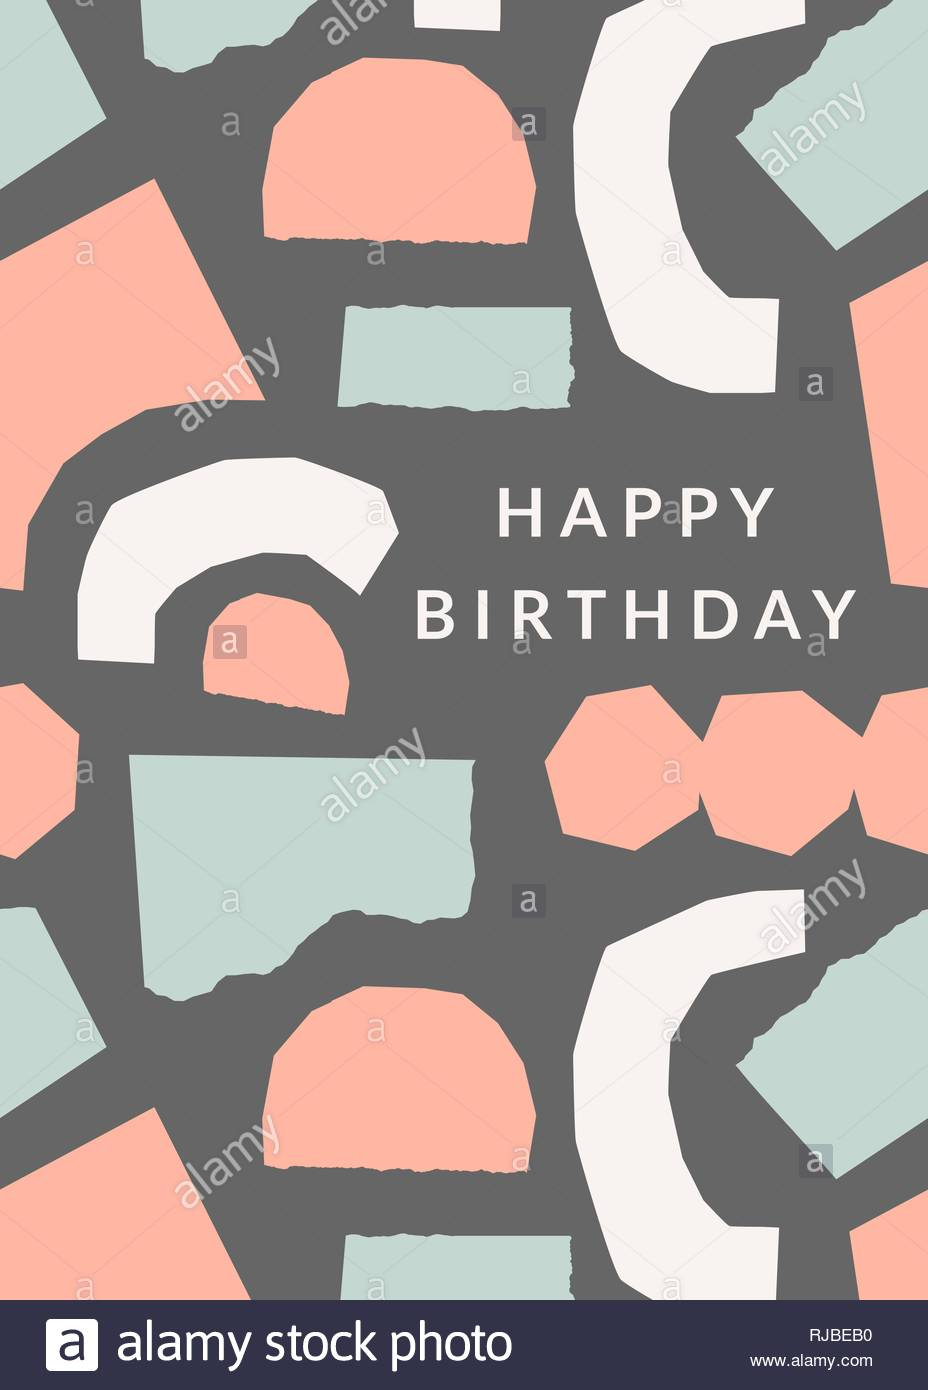 Greeting Card Template With Torn Paper Pieces In Pastel In Birthday Card Collage Template